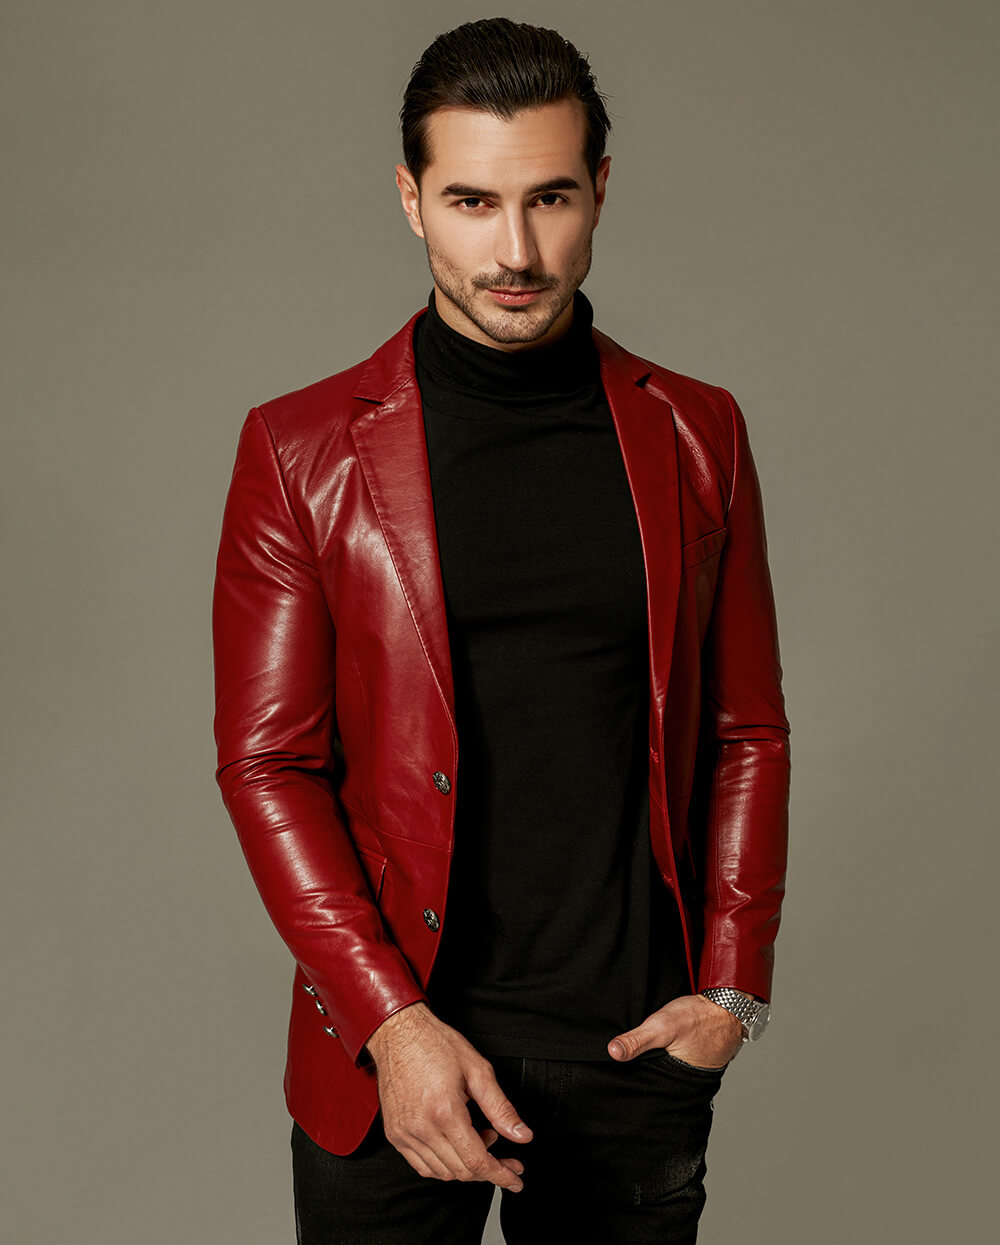 protein Rouse Jep Best Men's Classic Red Blazer Genuine Leather Jacket | PalaLeather